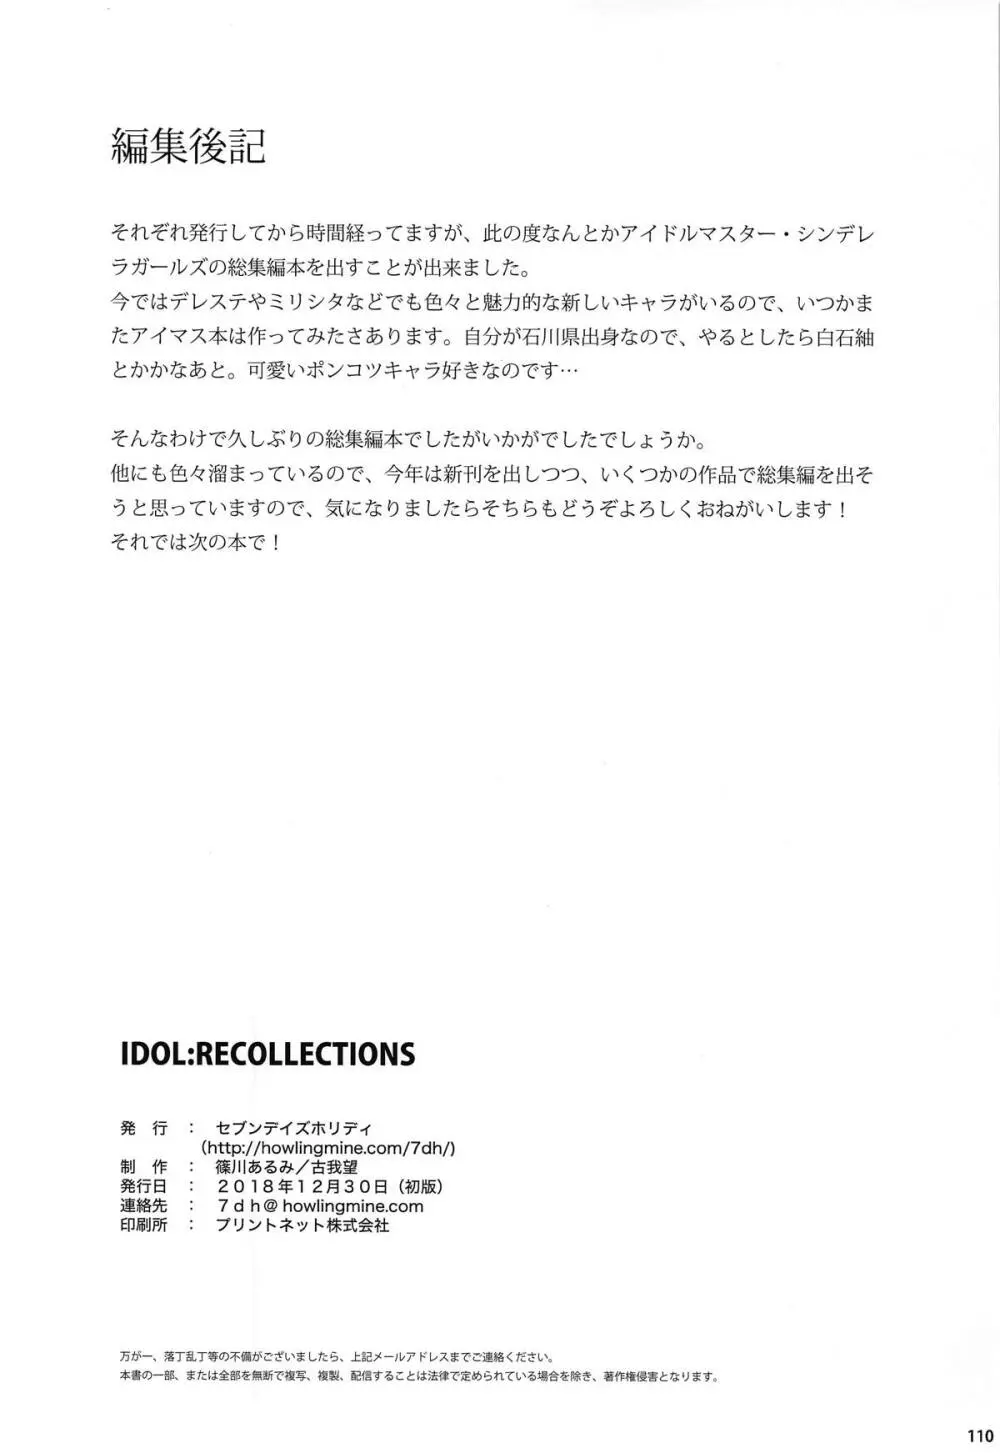 lDOL:RECOLLECTlONS 109ページ